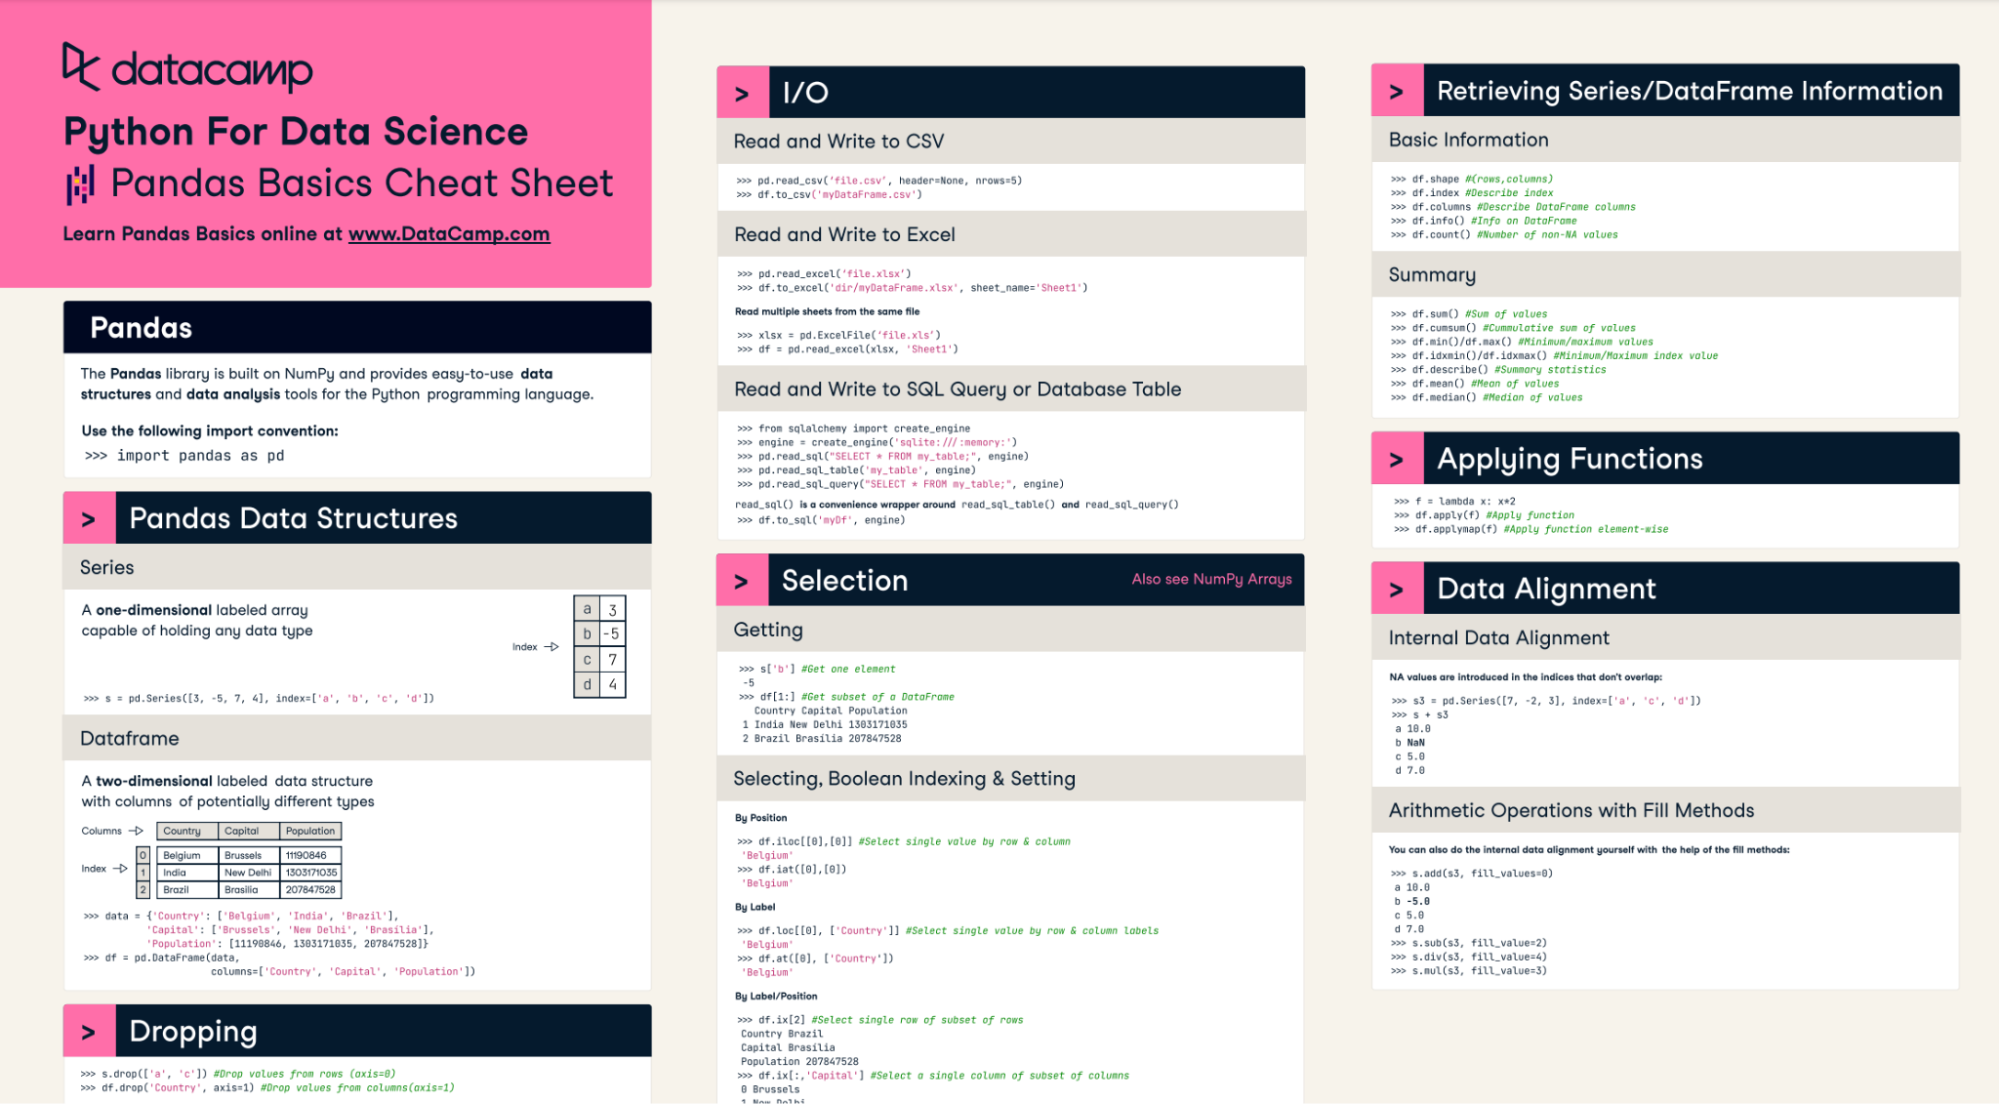 Our pandas cheat sheet can help you master this data science tool.